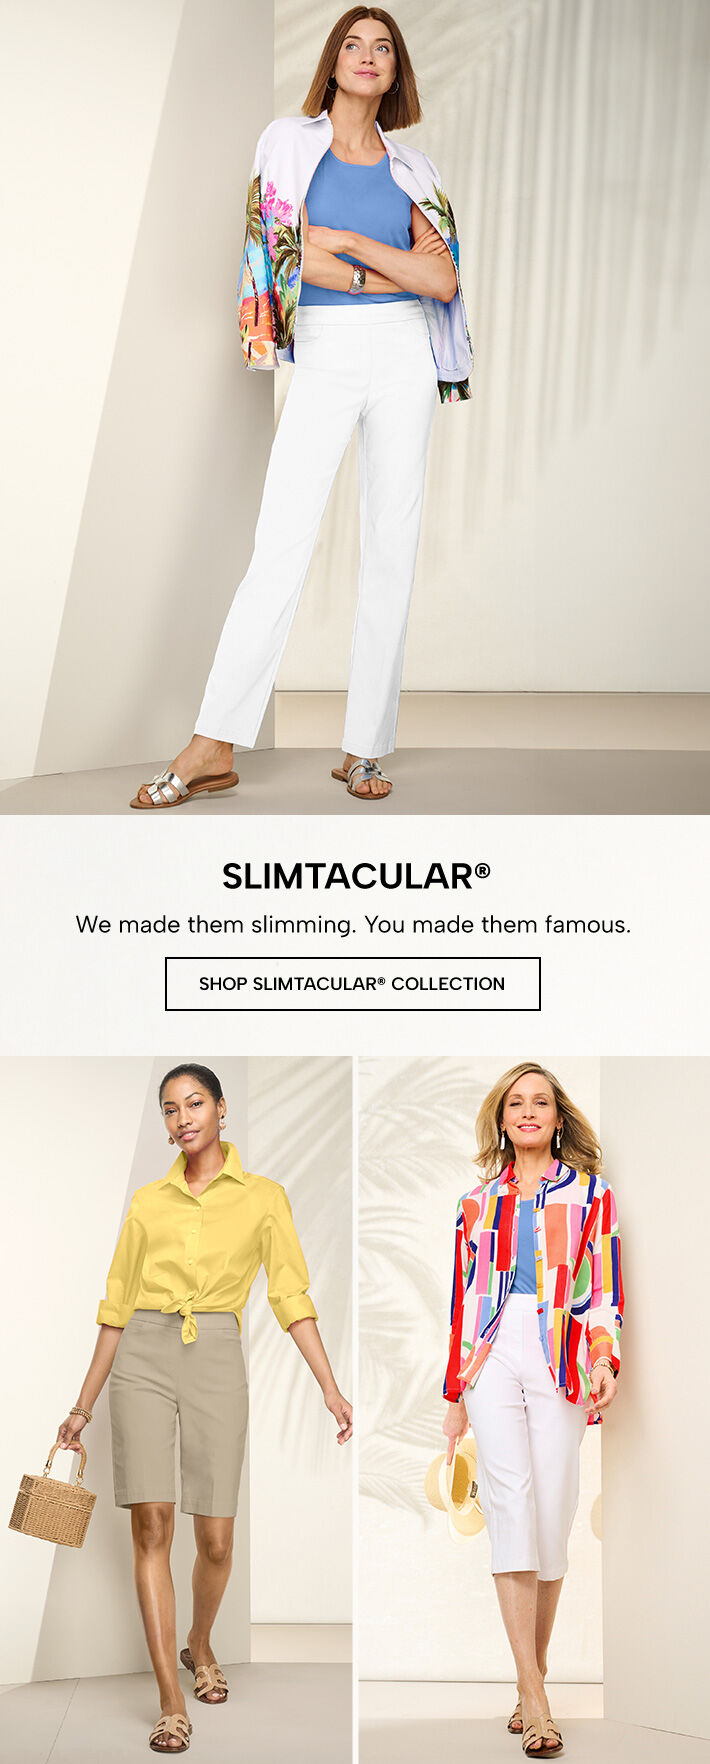 slimtqacular we made them slimming. You made them famous. shop slimtacular collection slimtacular pull-on pants slimtacular shorts slimtacular capris